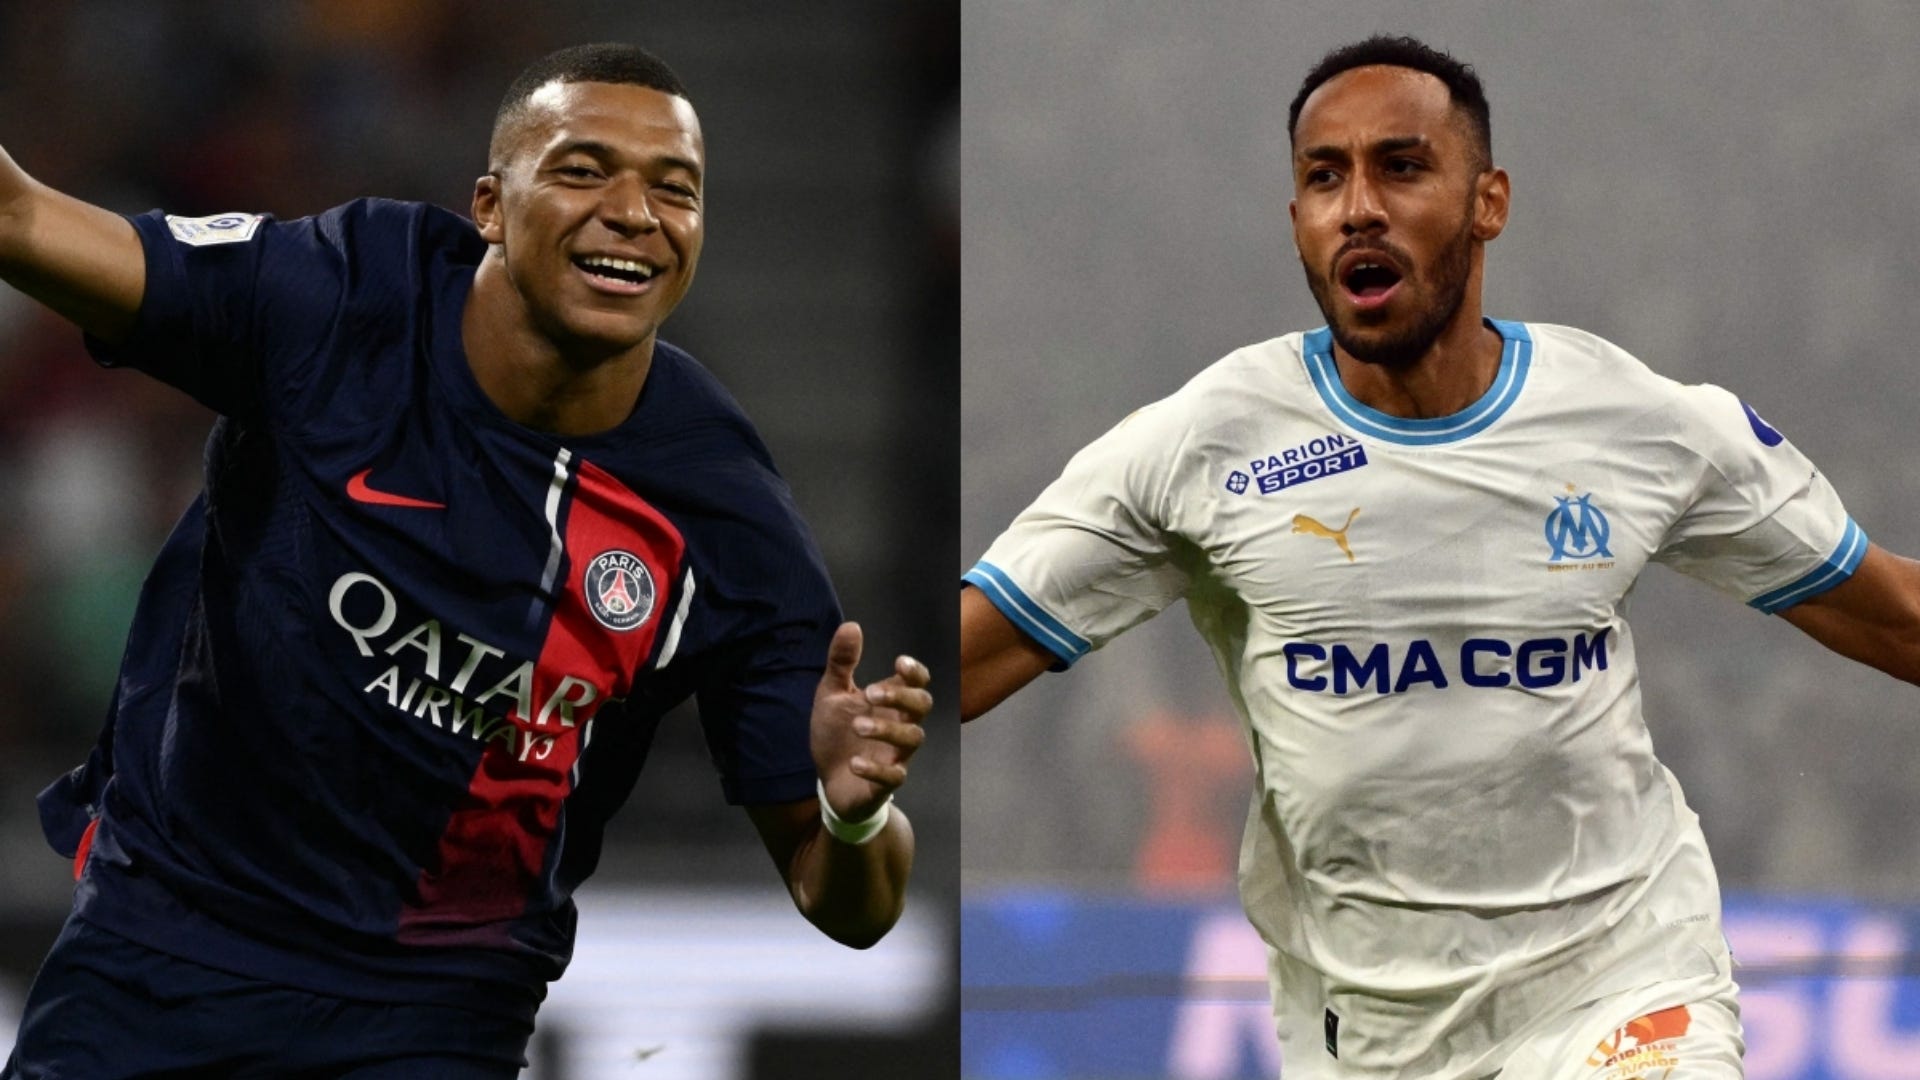 PSG vs Marseille Where to watch the match online, live stream, TV channels, and kick-off time Goal UK